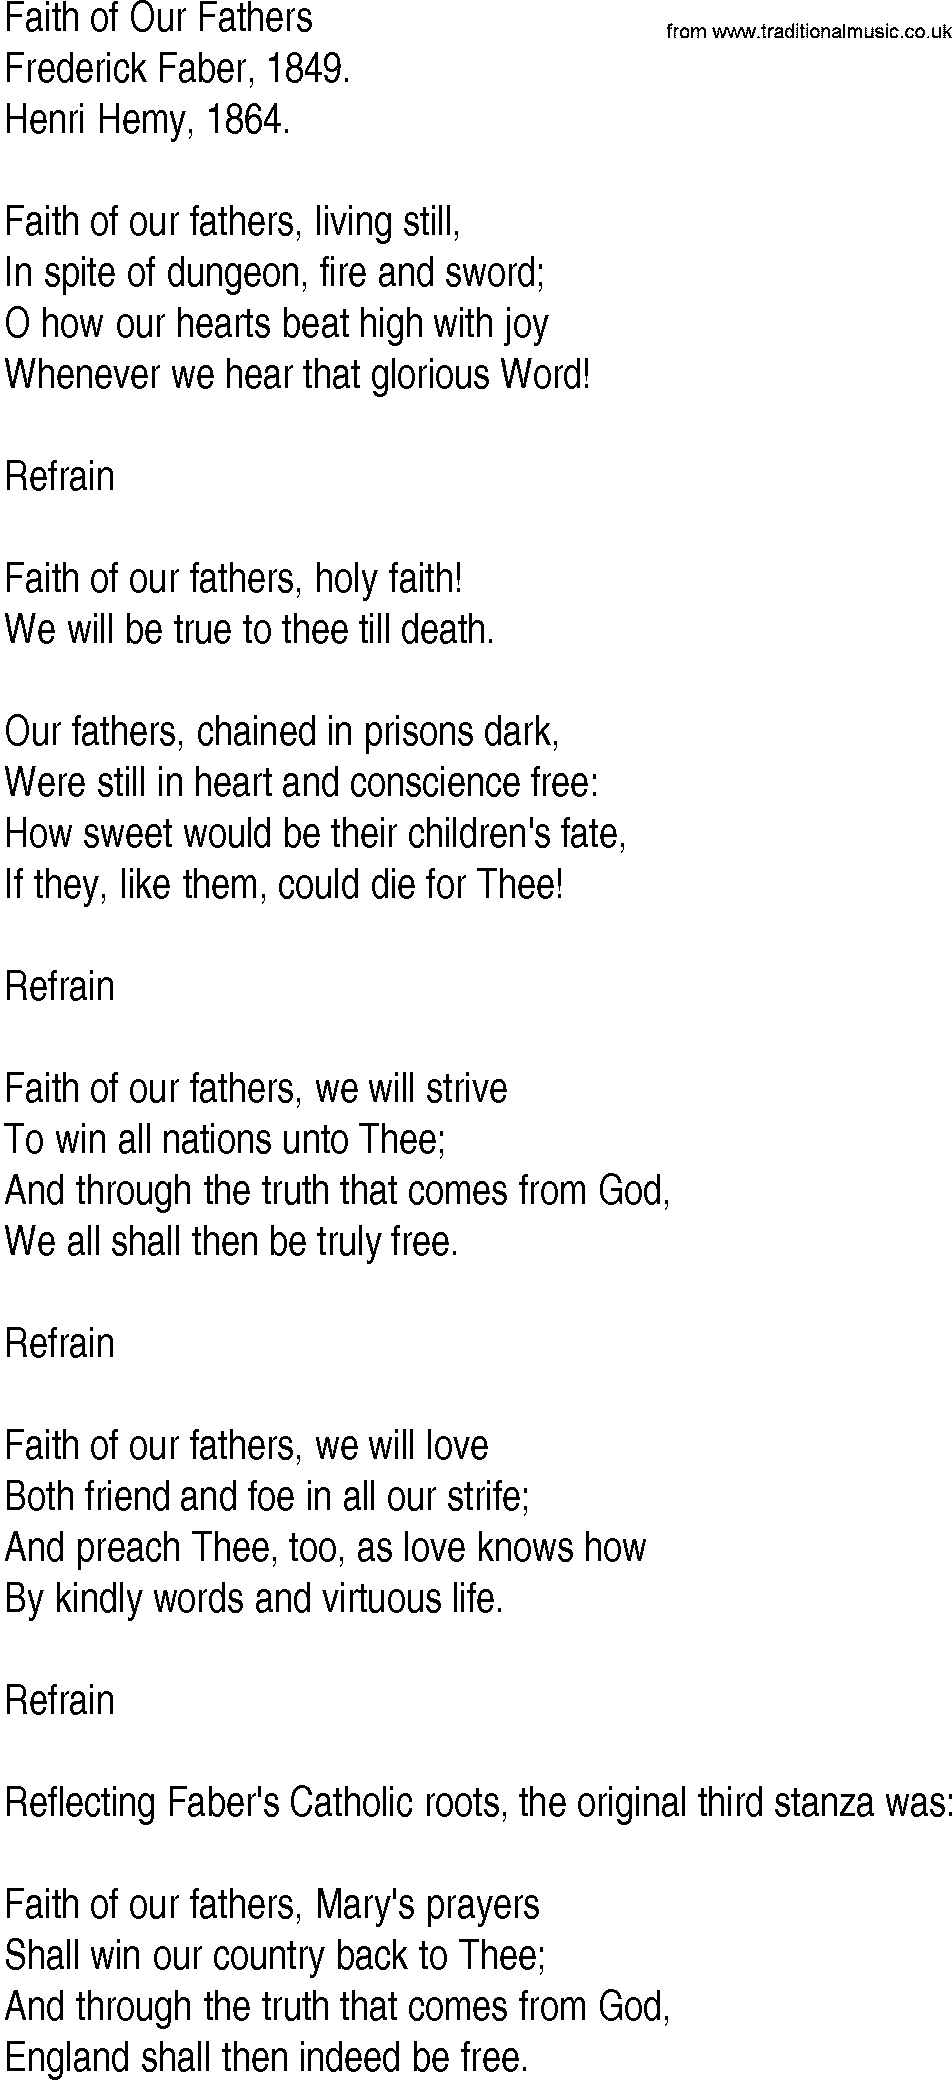 Hymn and Gospel Song: Faith of Our Fathers by Frederick Faber lyrics